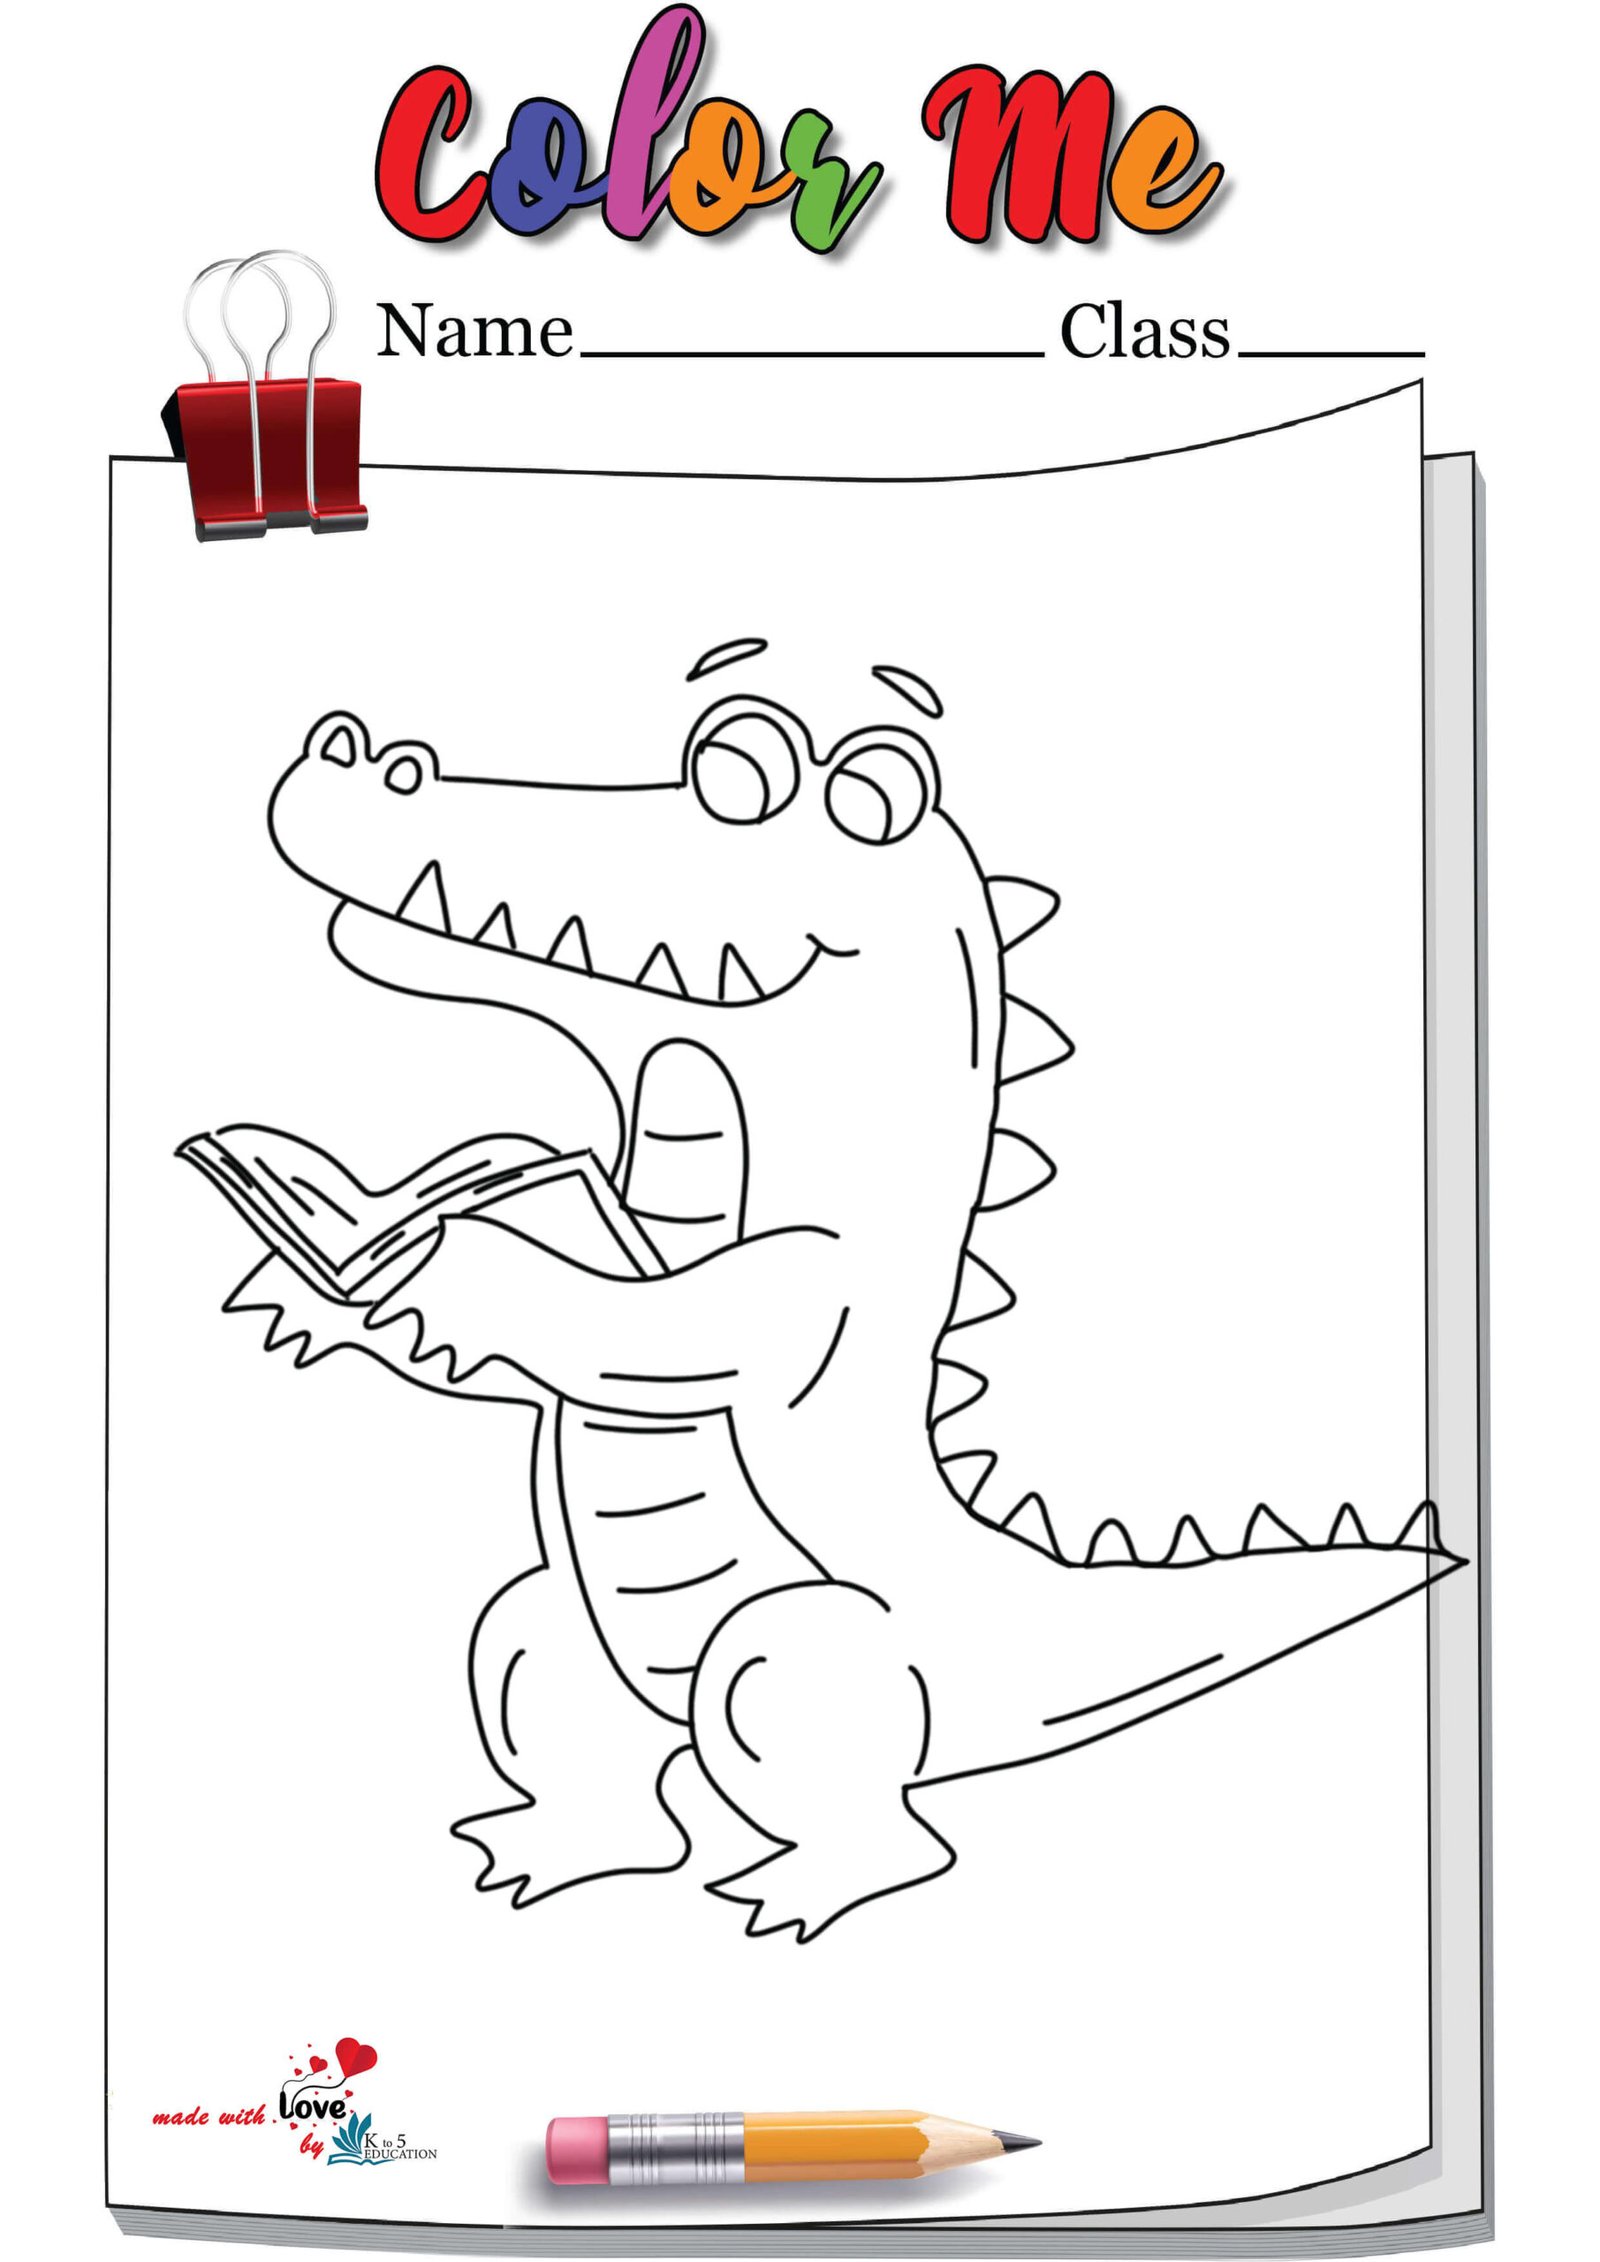 Alligator Reading A Book Coloring Page